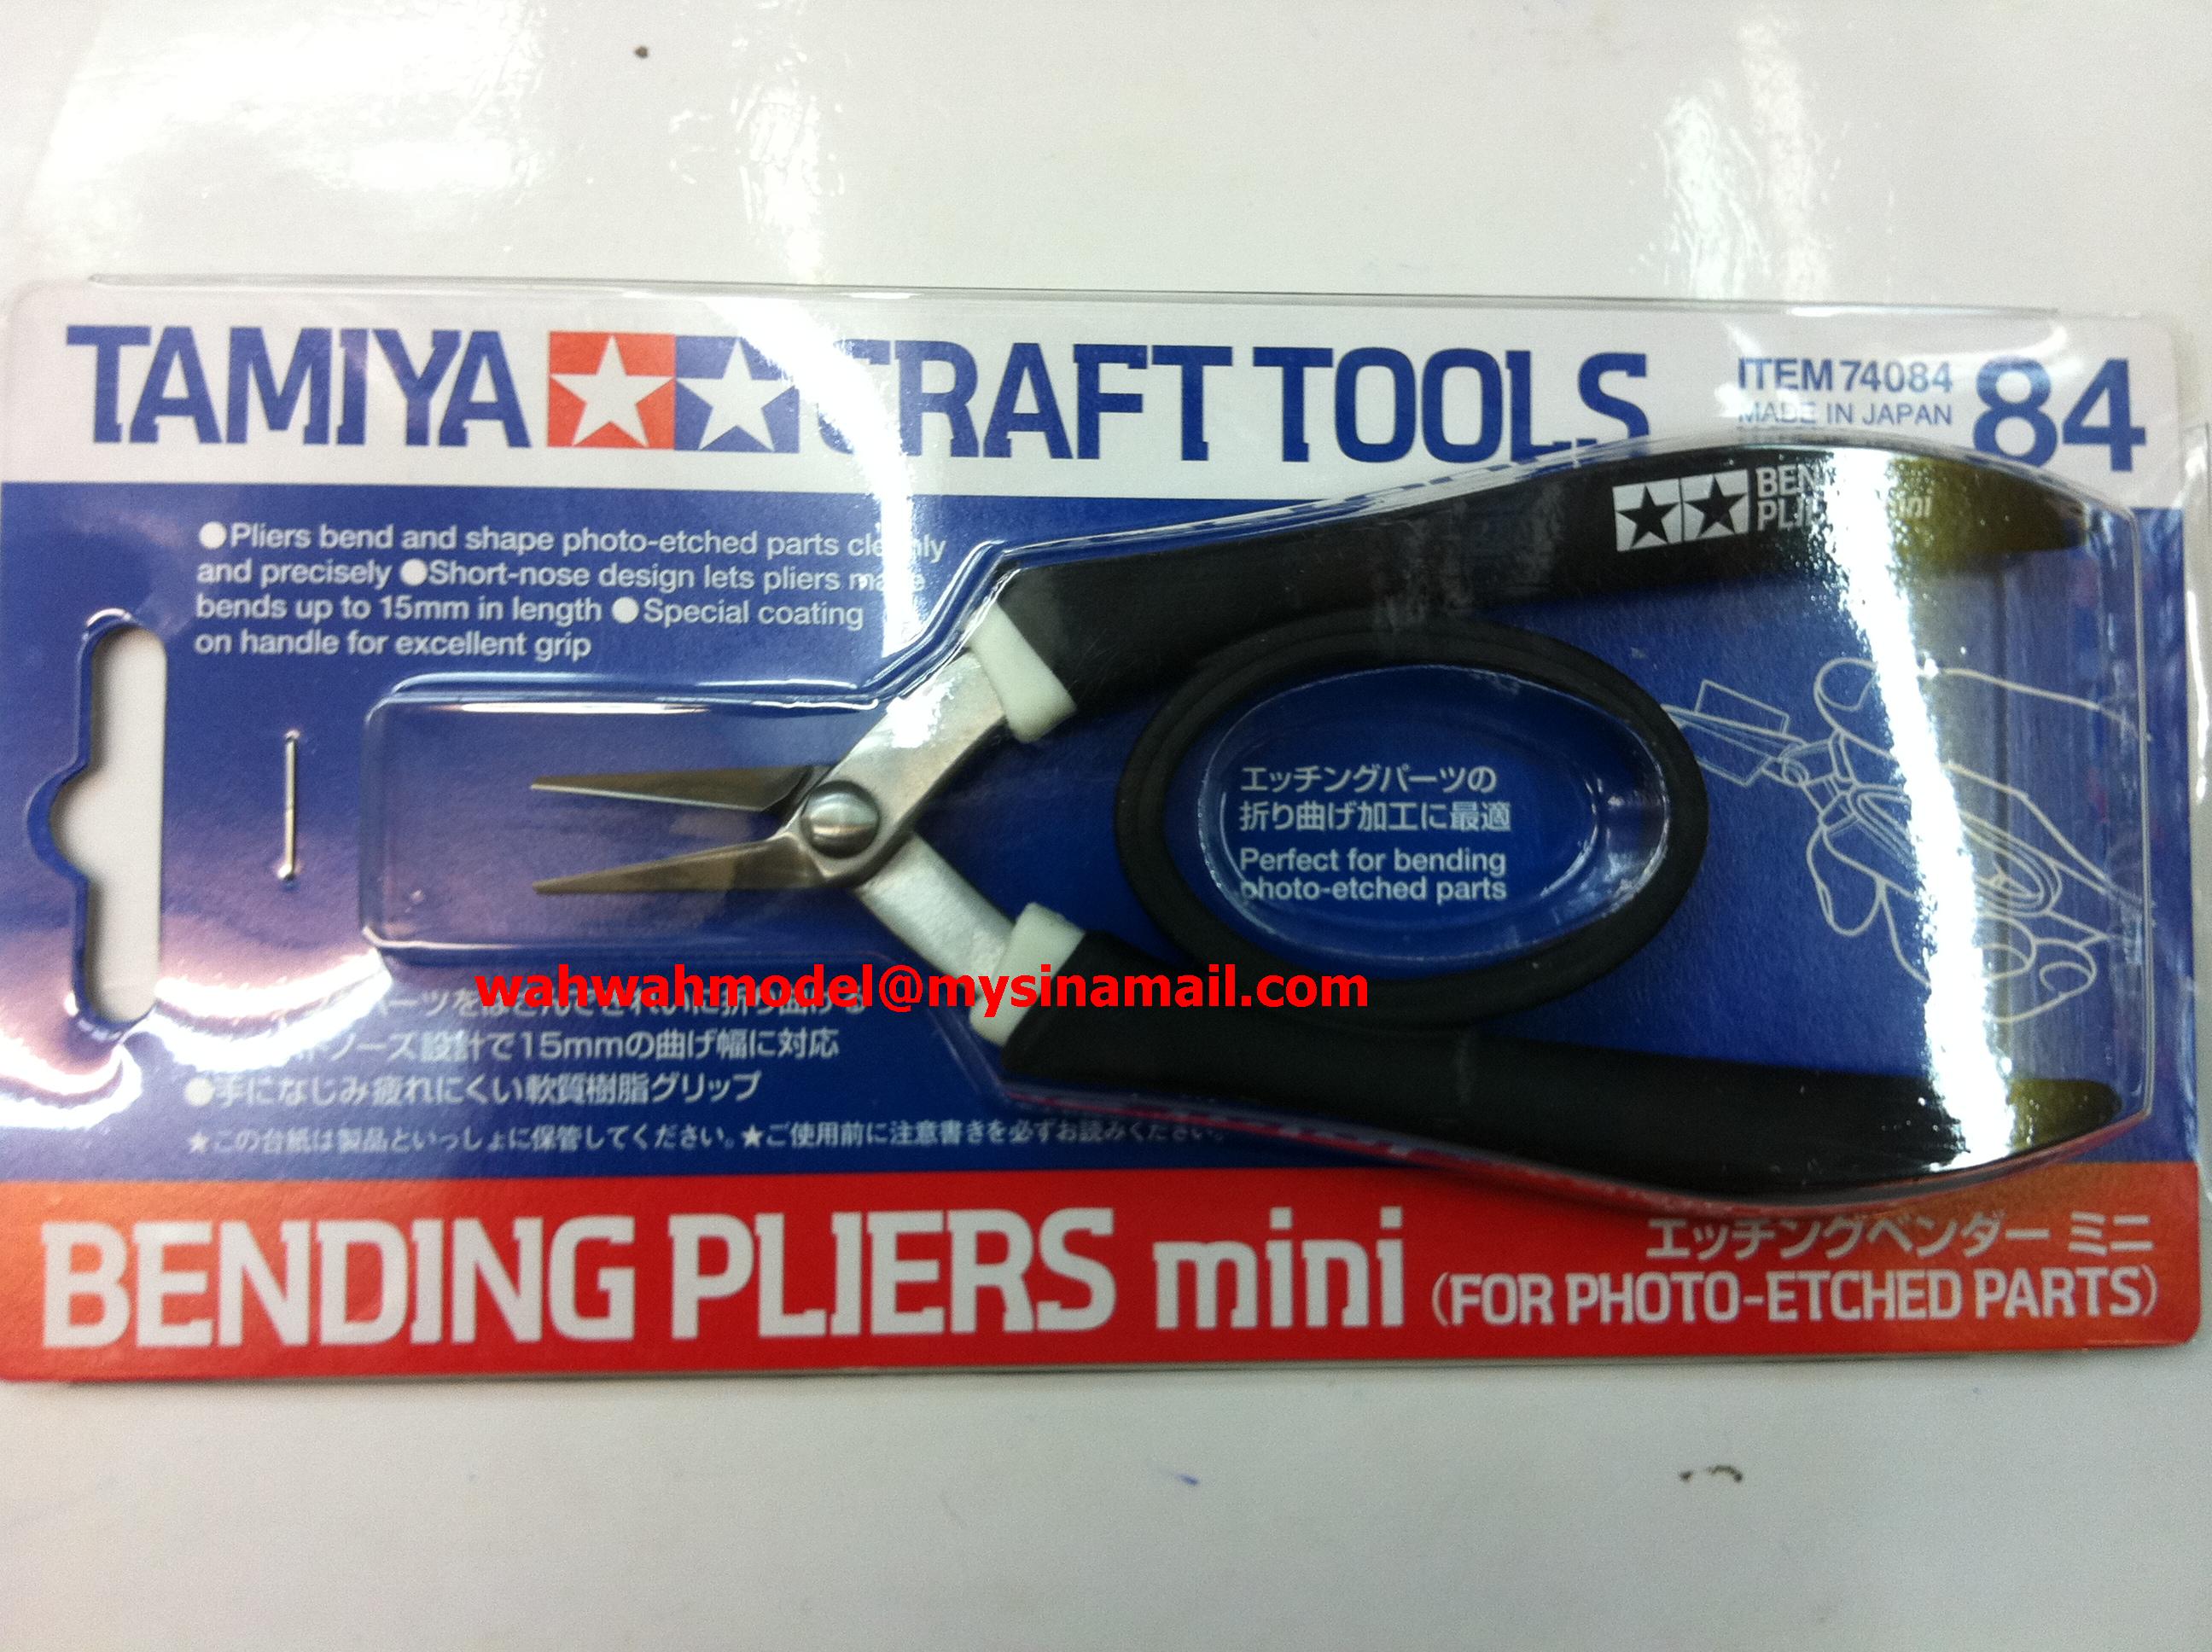 Tamiya Model Craft Tools Mini Bending Pliers for Photo-Etched Parts 74084 